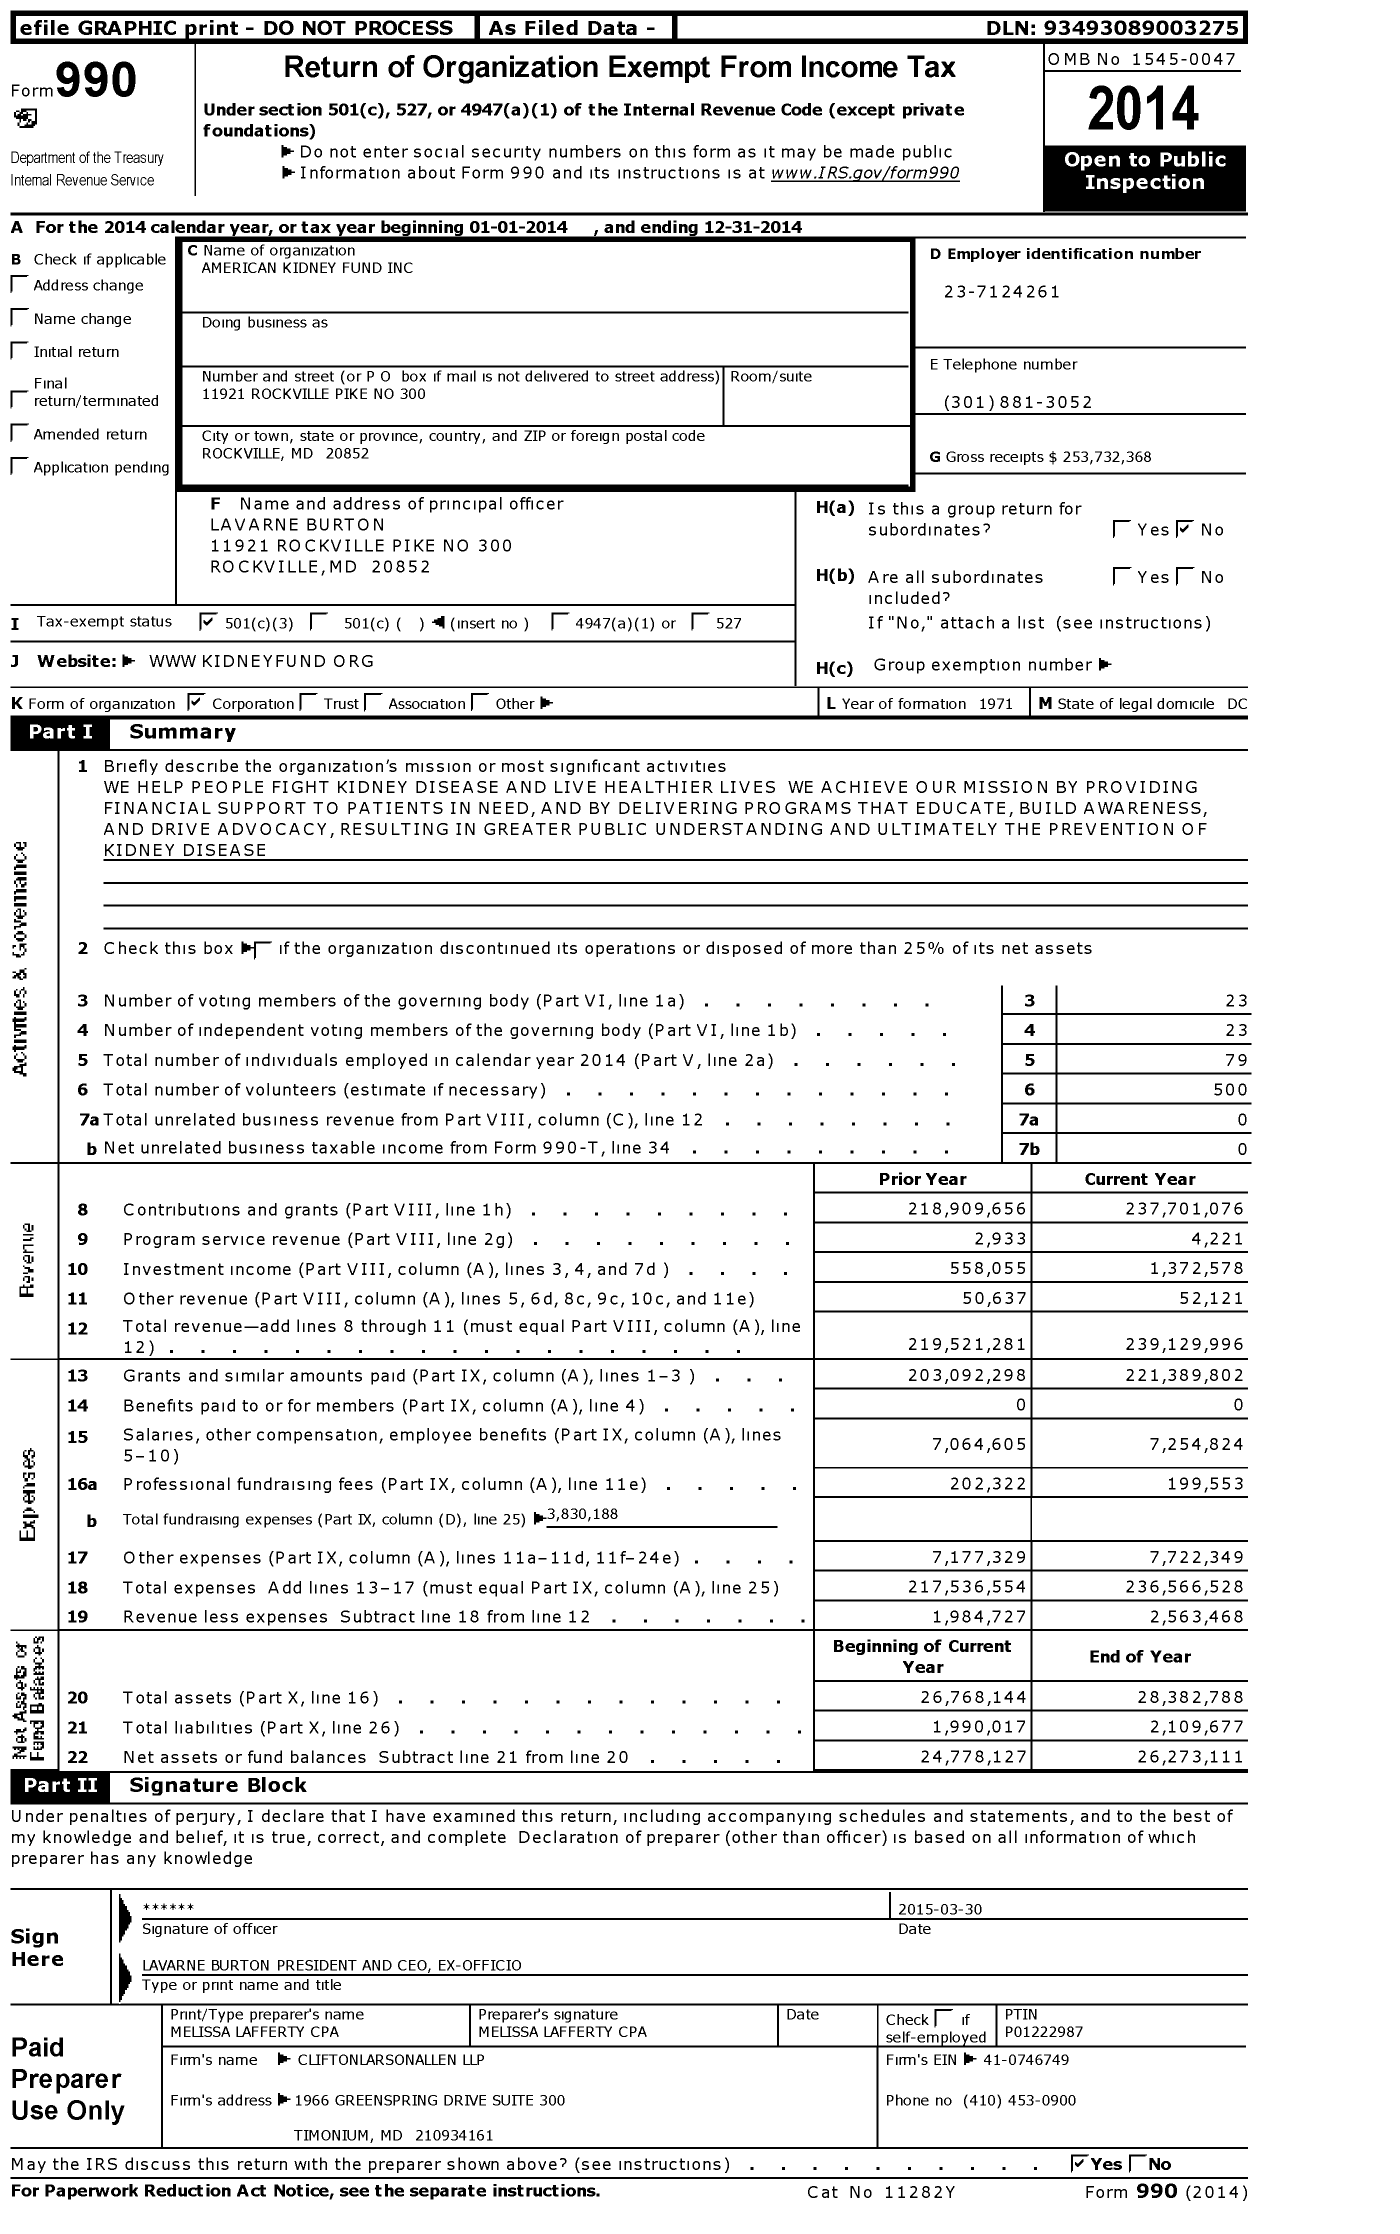 Image of first page of 2014 Form 990 for American Kidney Fund (AKF)